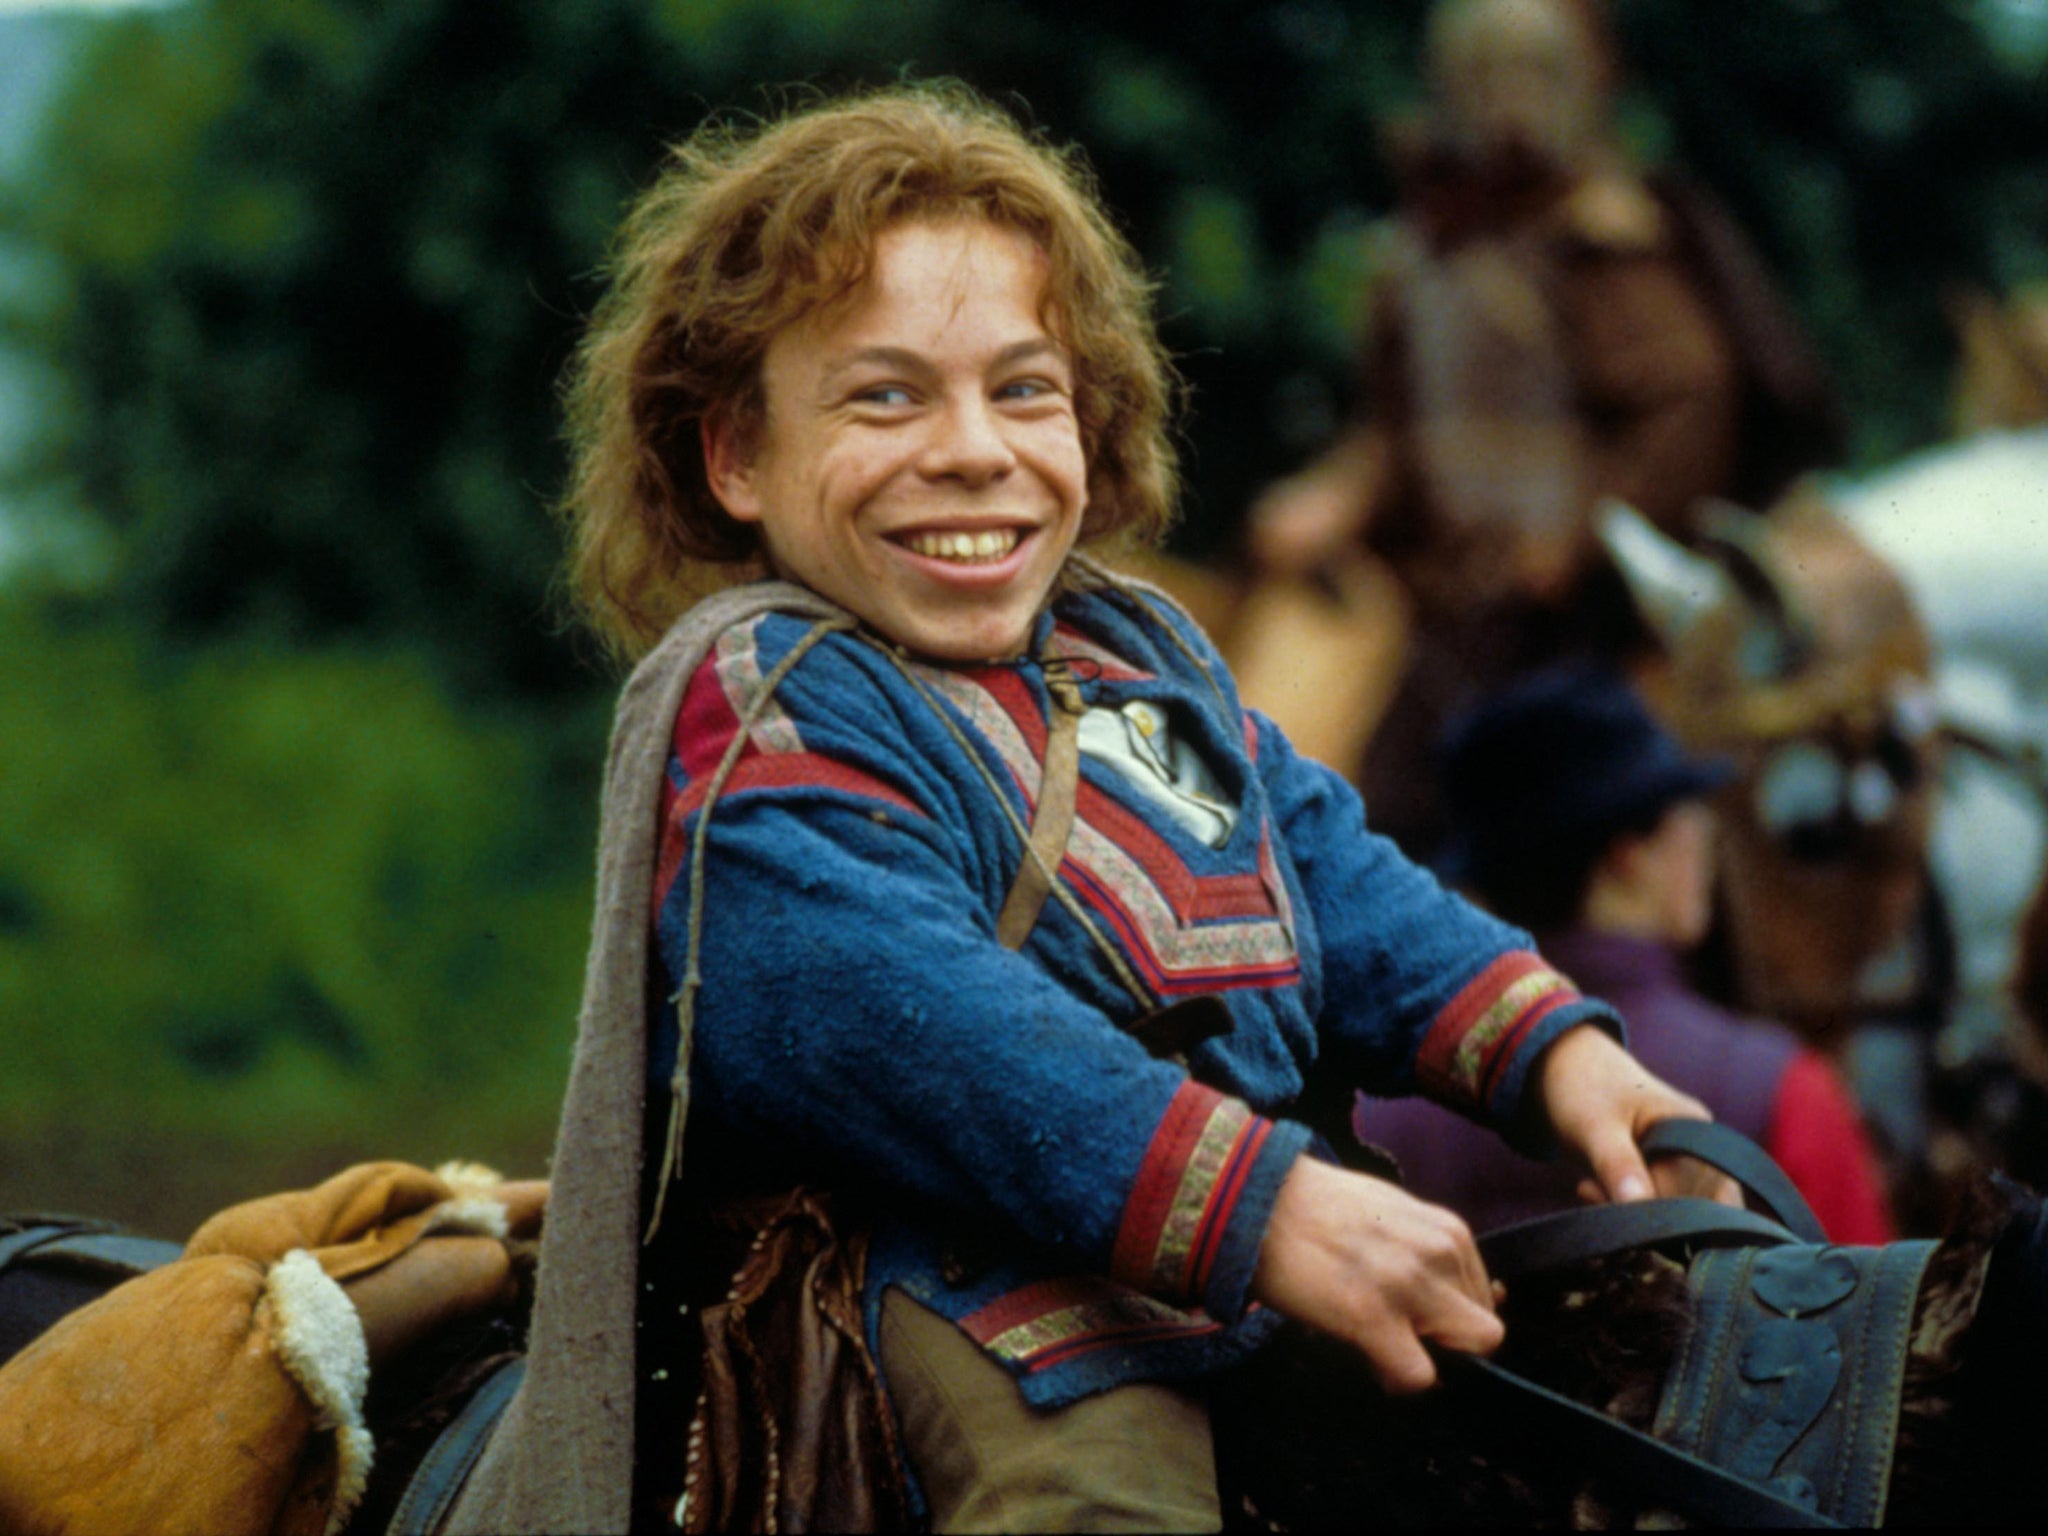 Willow on Disney Plus Tolkien knock-off or a secret classic? The Independent